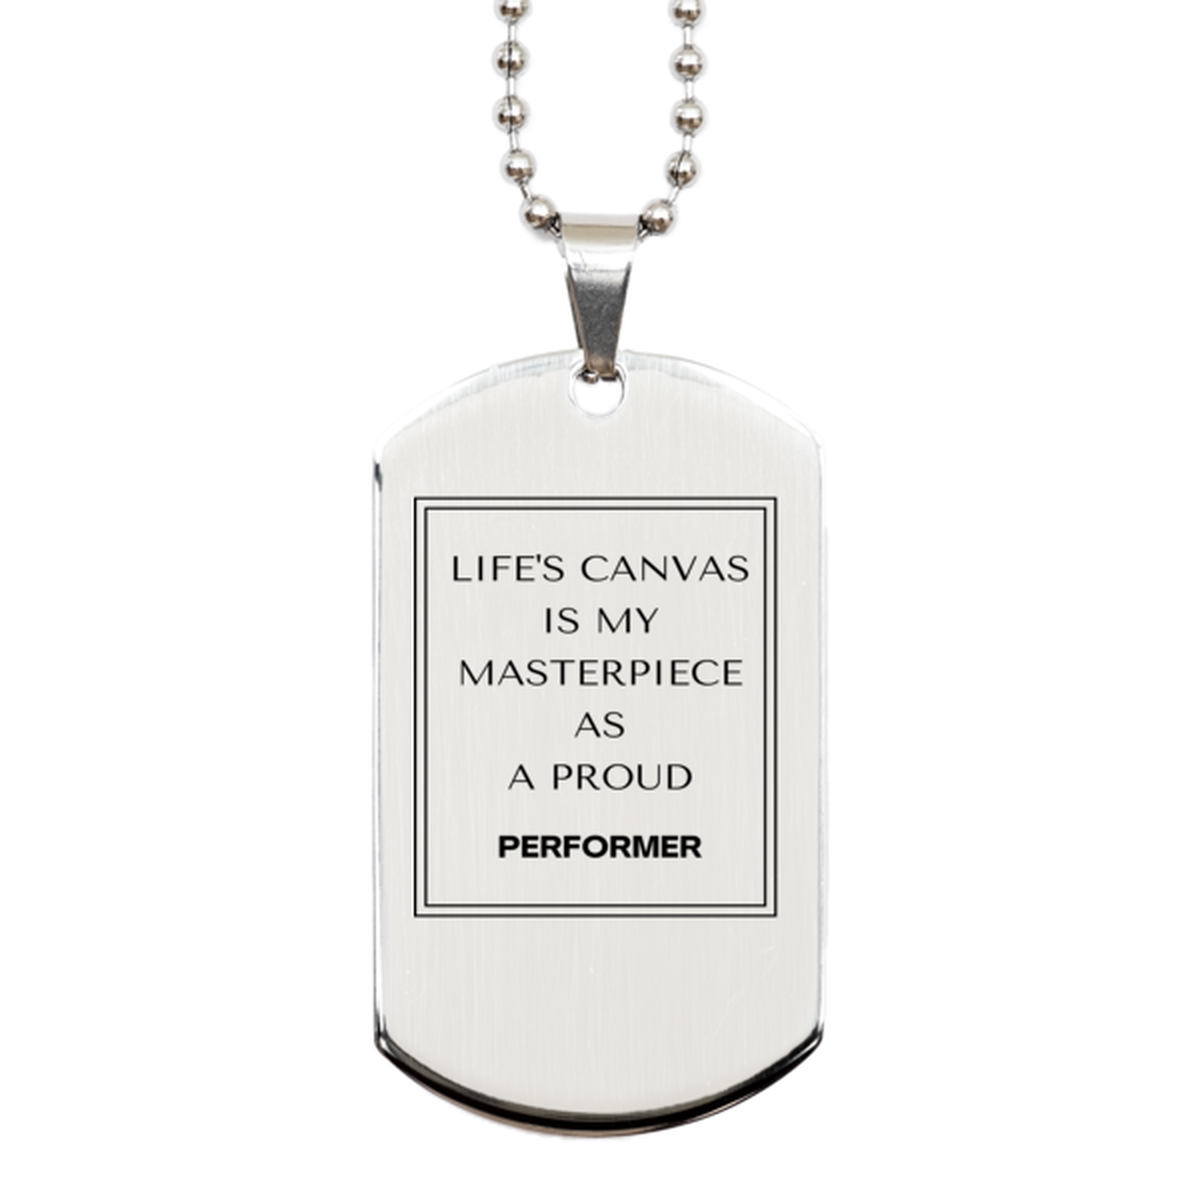 Proud Performer Gifts, Life's canvas is my masterpiece, Epic Birthday Christmas Unique Silver Dog Tag For Performer, Coworkers, Men, Women, Friends